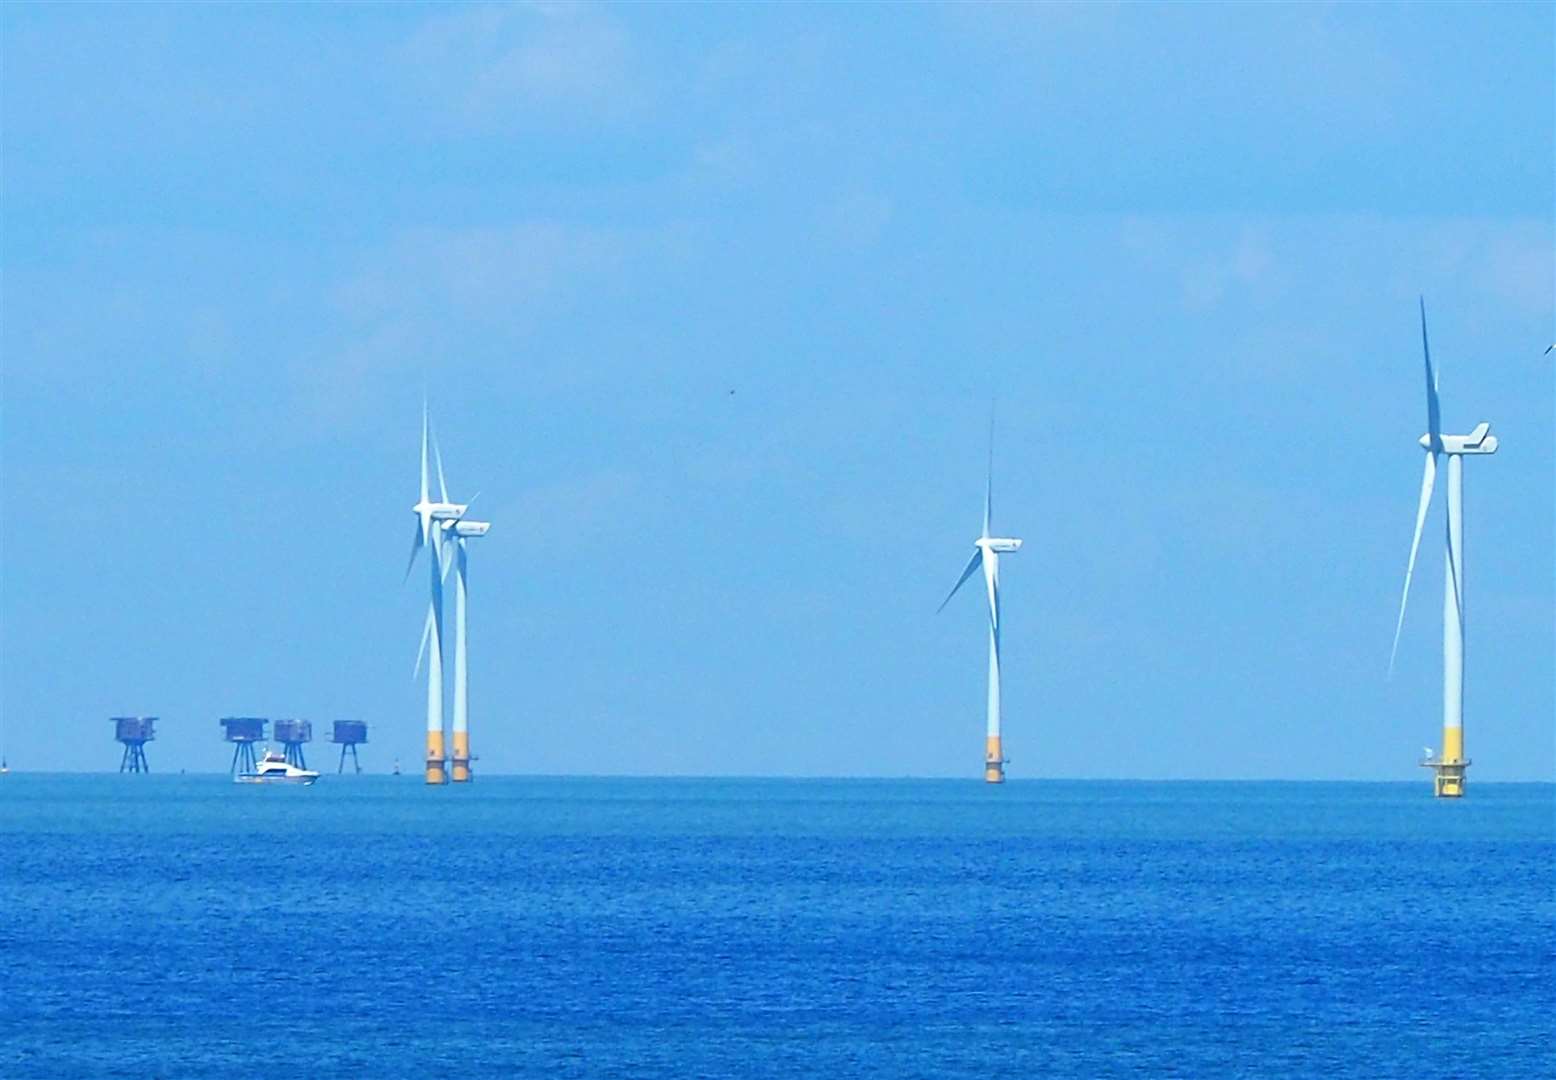 The Kentish Flats offshore wind farm, located off the coast of Herne Bay and Whitstable. Picture: Peter Gainey